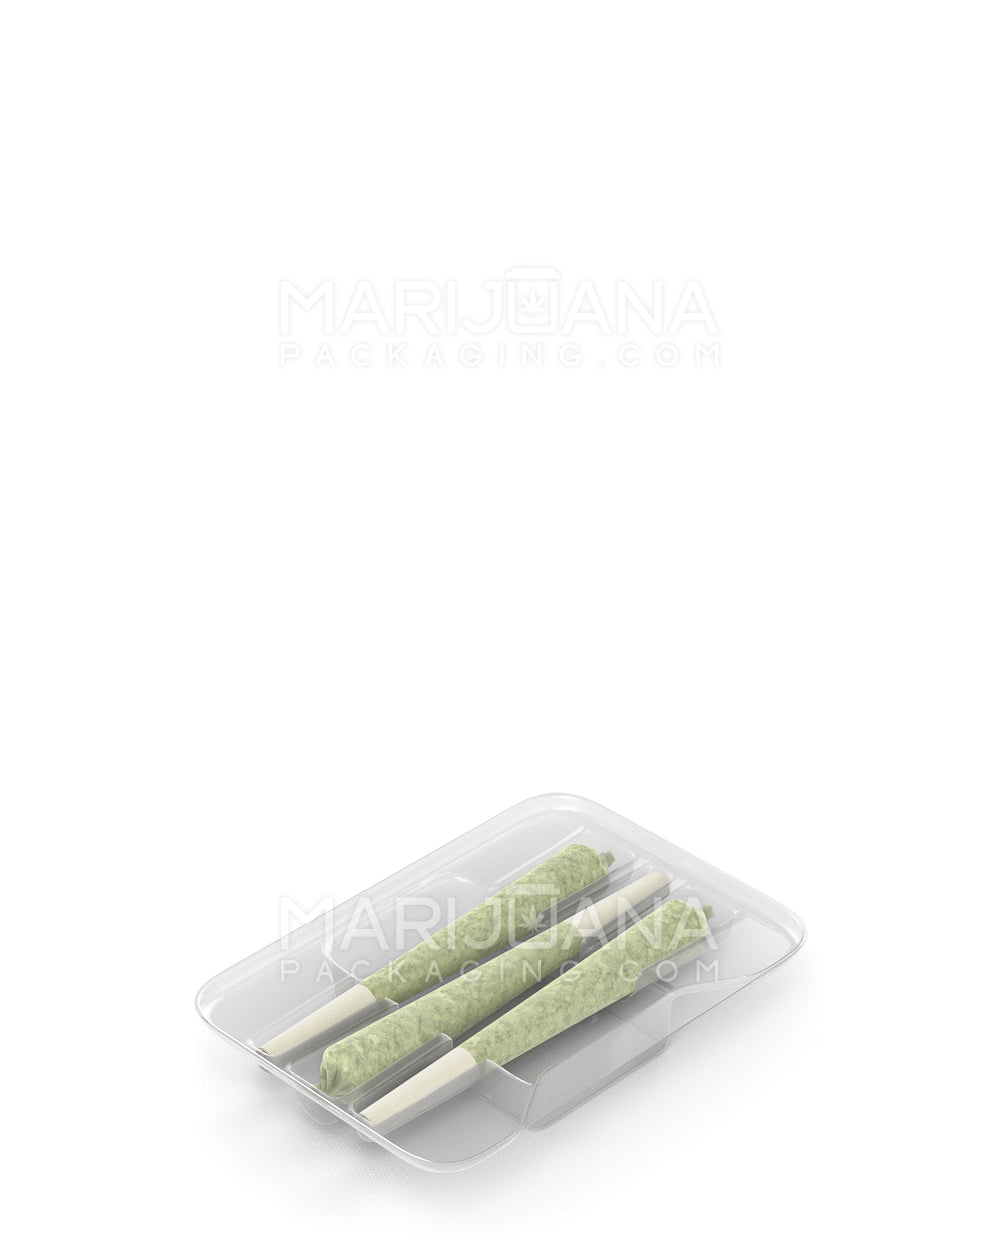 Edible & Joint Box Insert Tray for 3 Mini Pre Rolled Cones | 70mm - Clear Plastic - 100 Count - 2